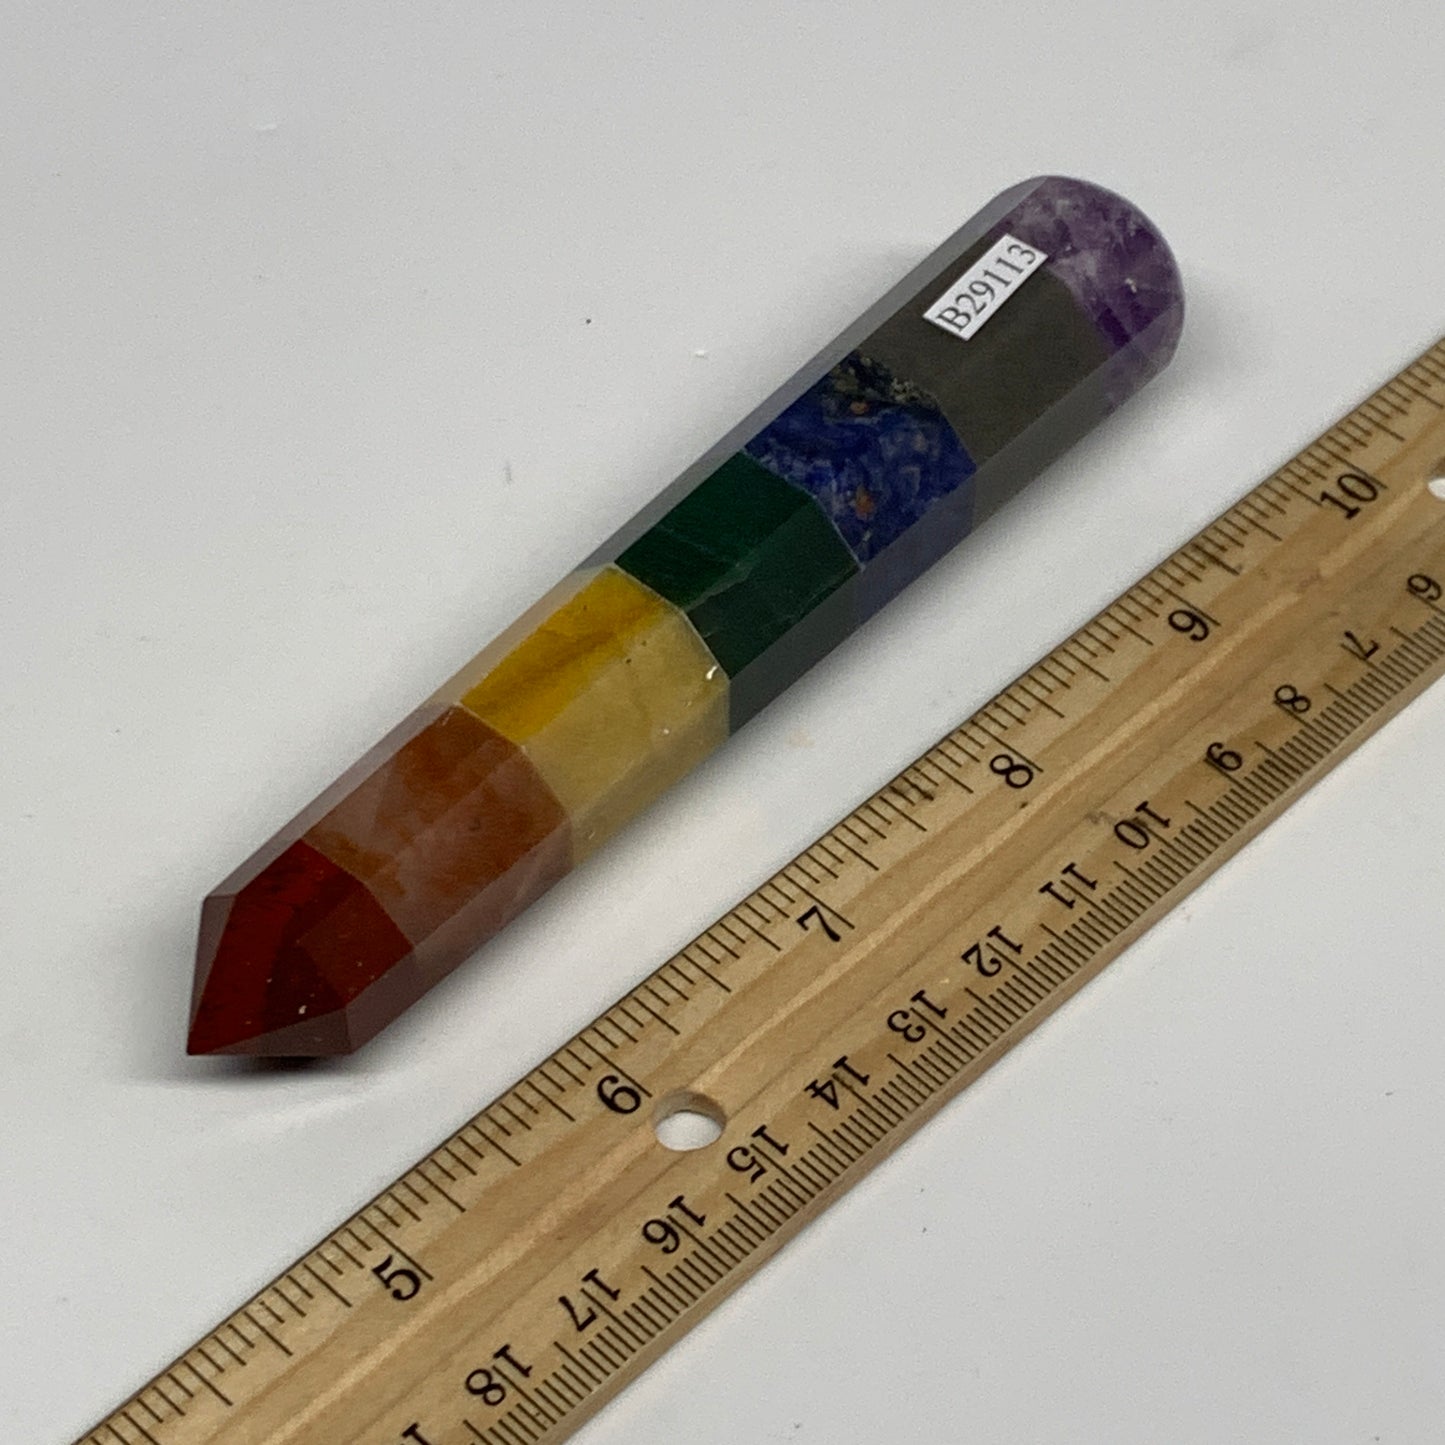 106.4g, 5.1"x0.9", 7 Chakra Point Wand Obelisk Point Crystal from India, B29113